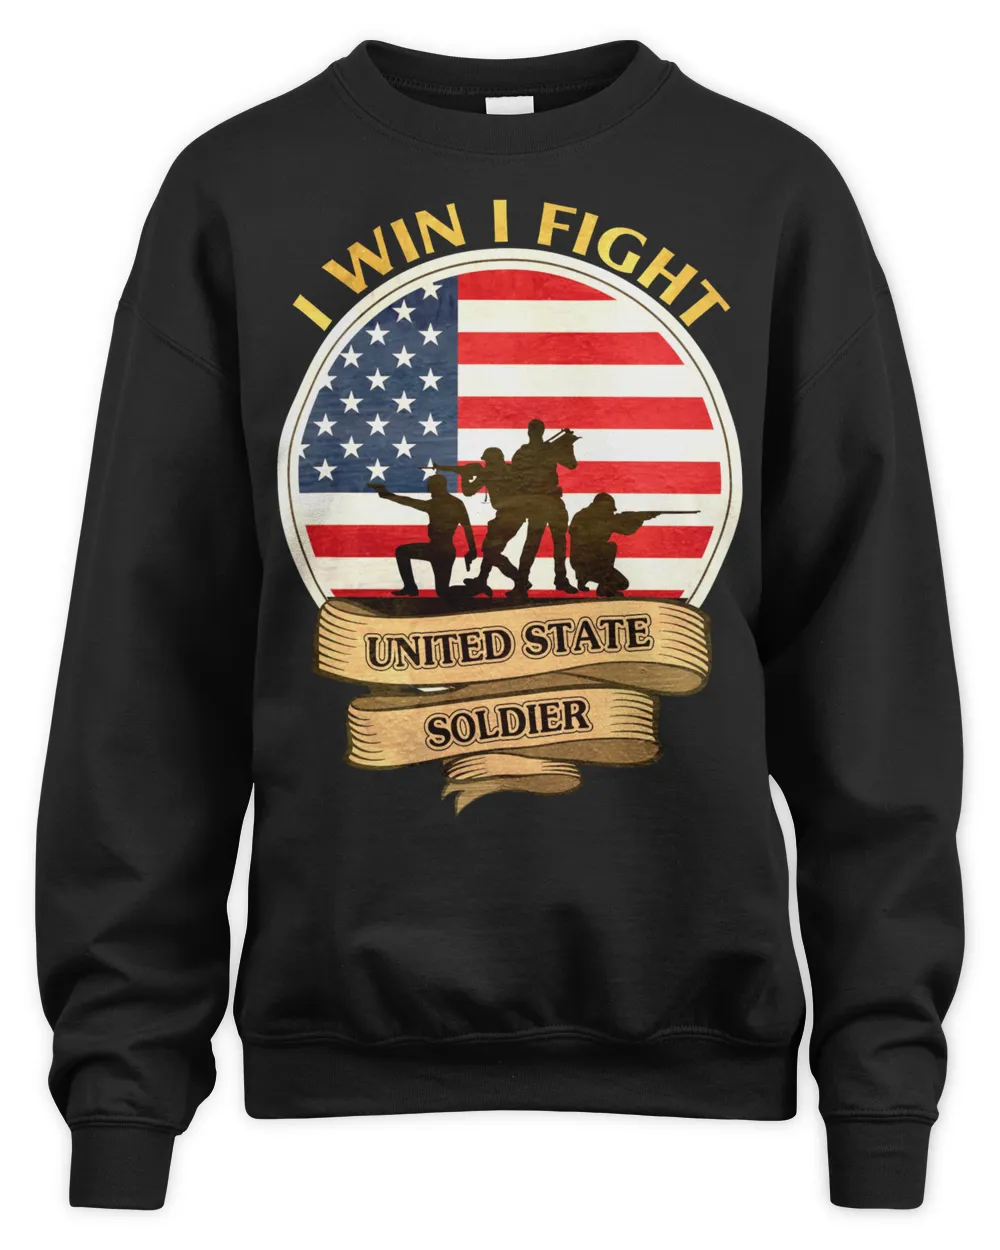 I win i fight united state soldier